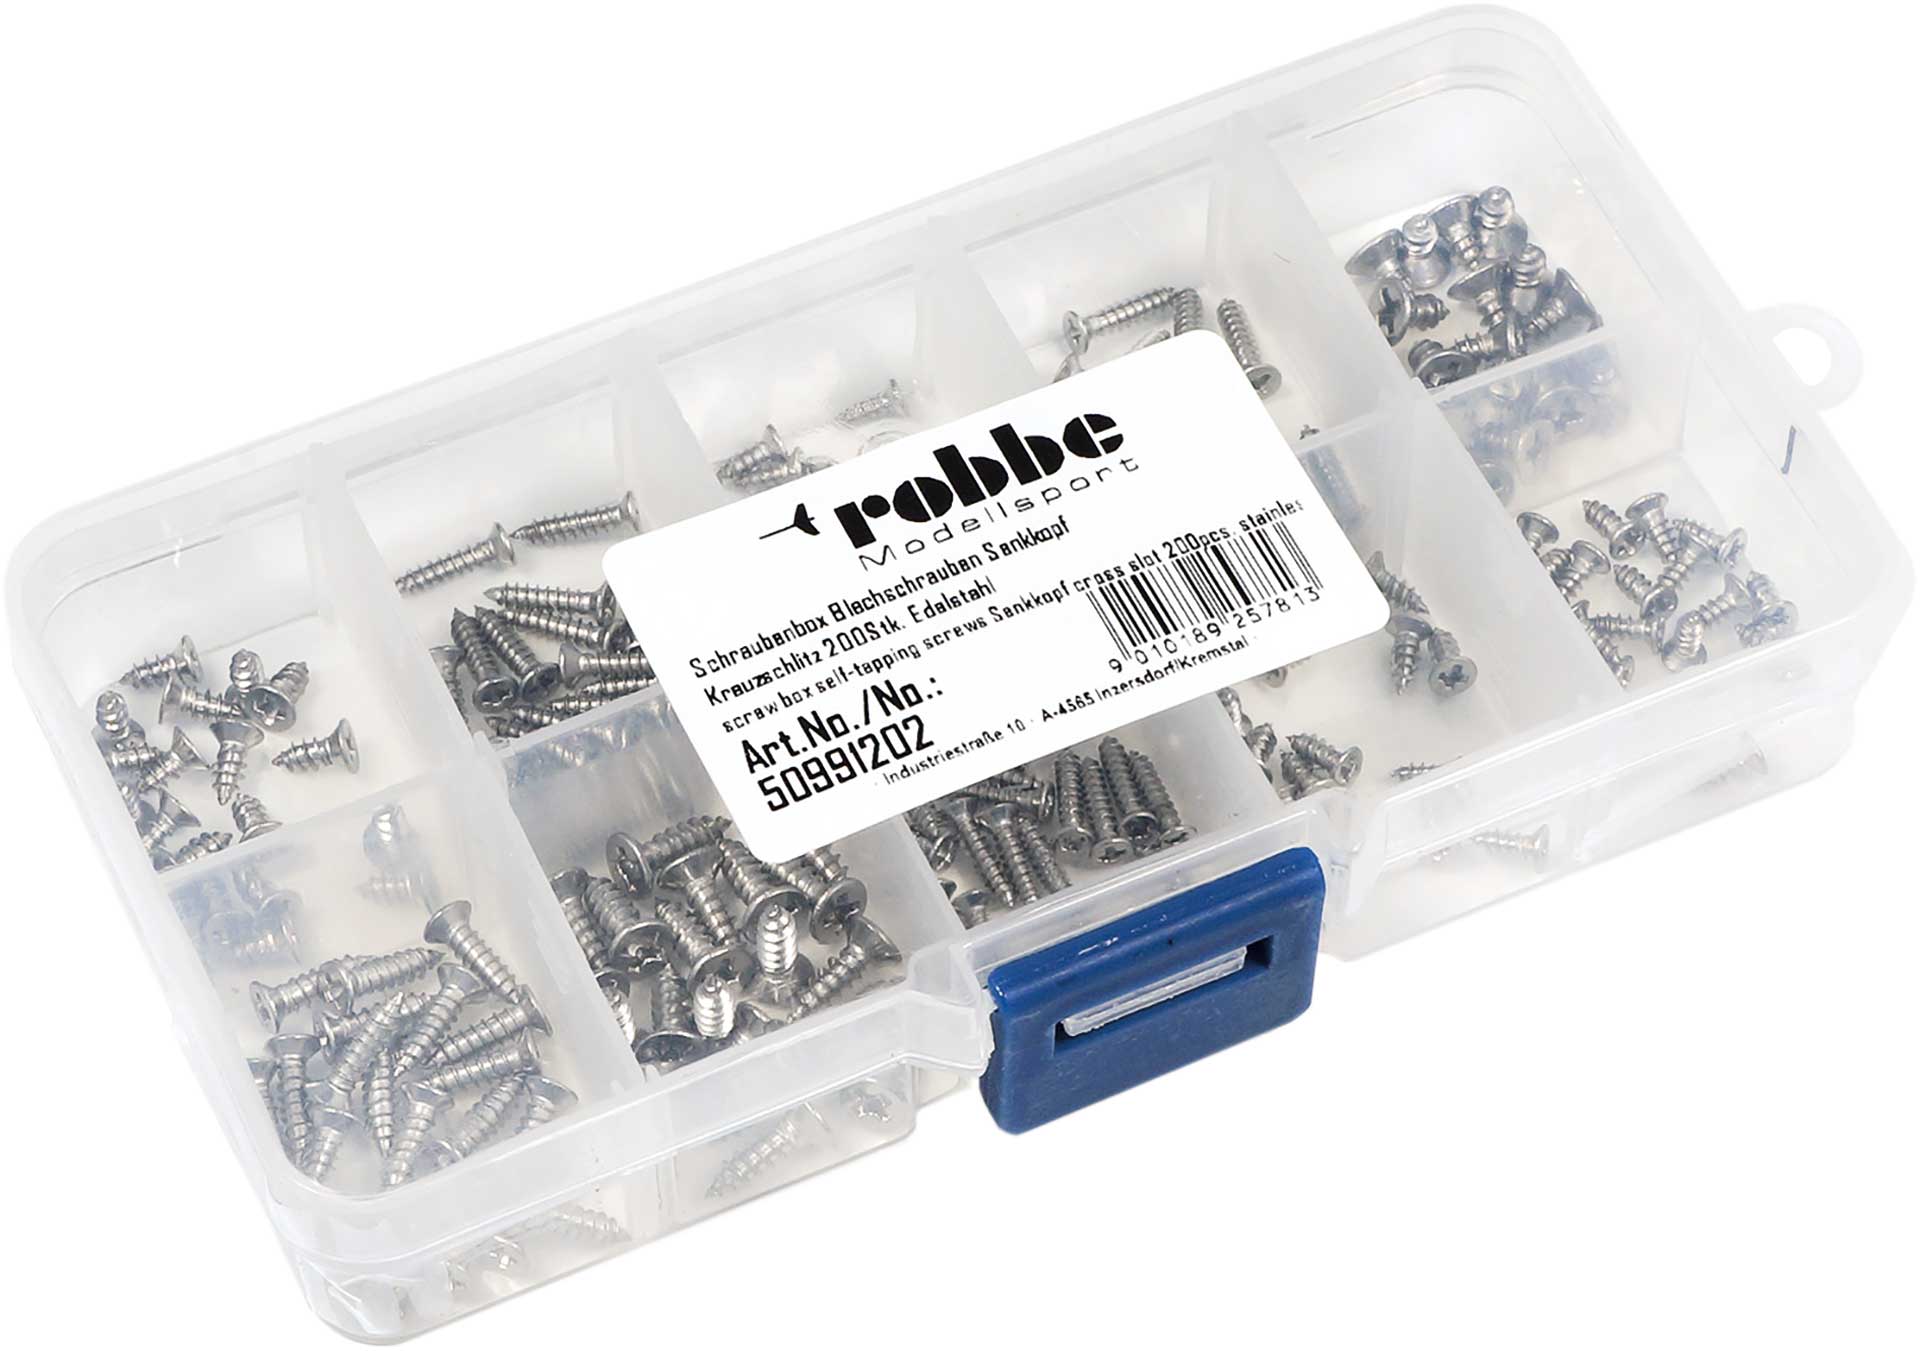 Robbe Modellsport Screw box Tapping screws countersunk head Cross recess 200pcs. stainless steel